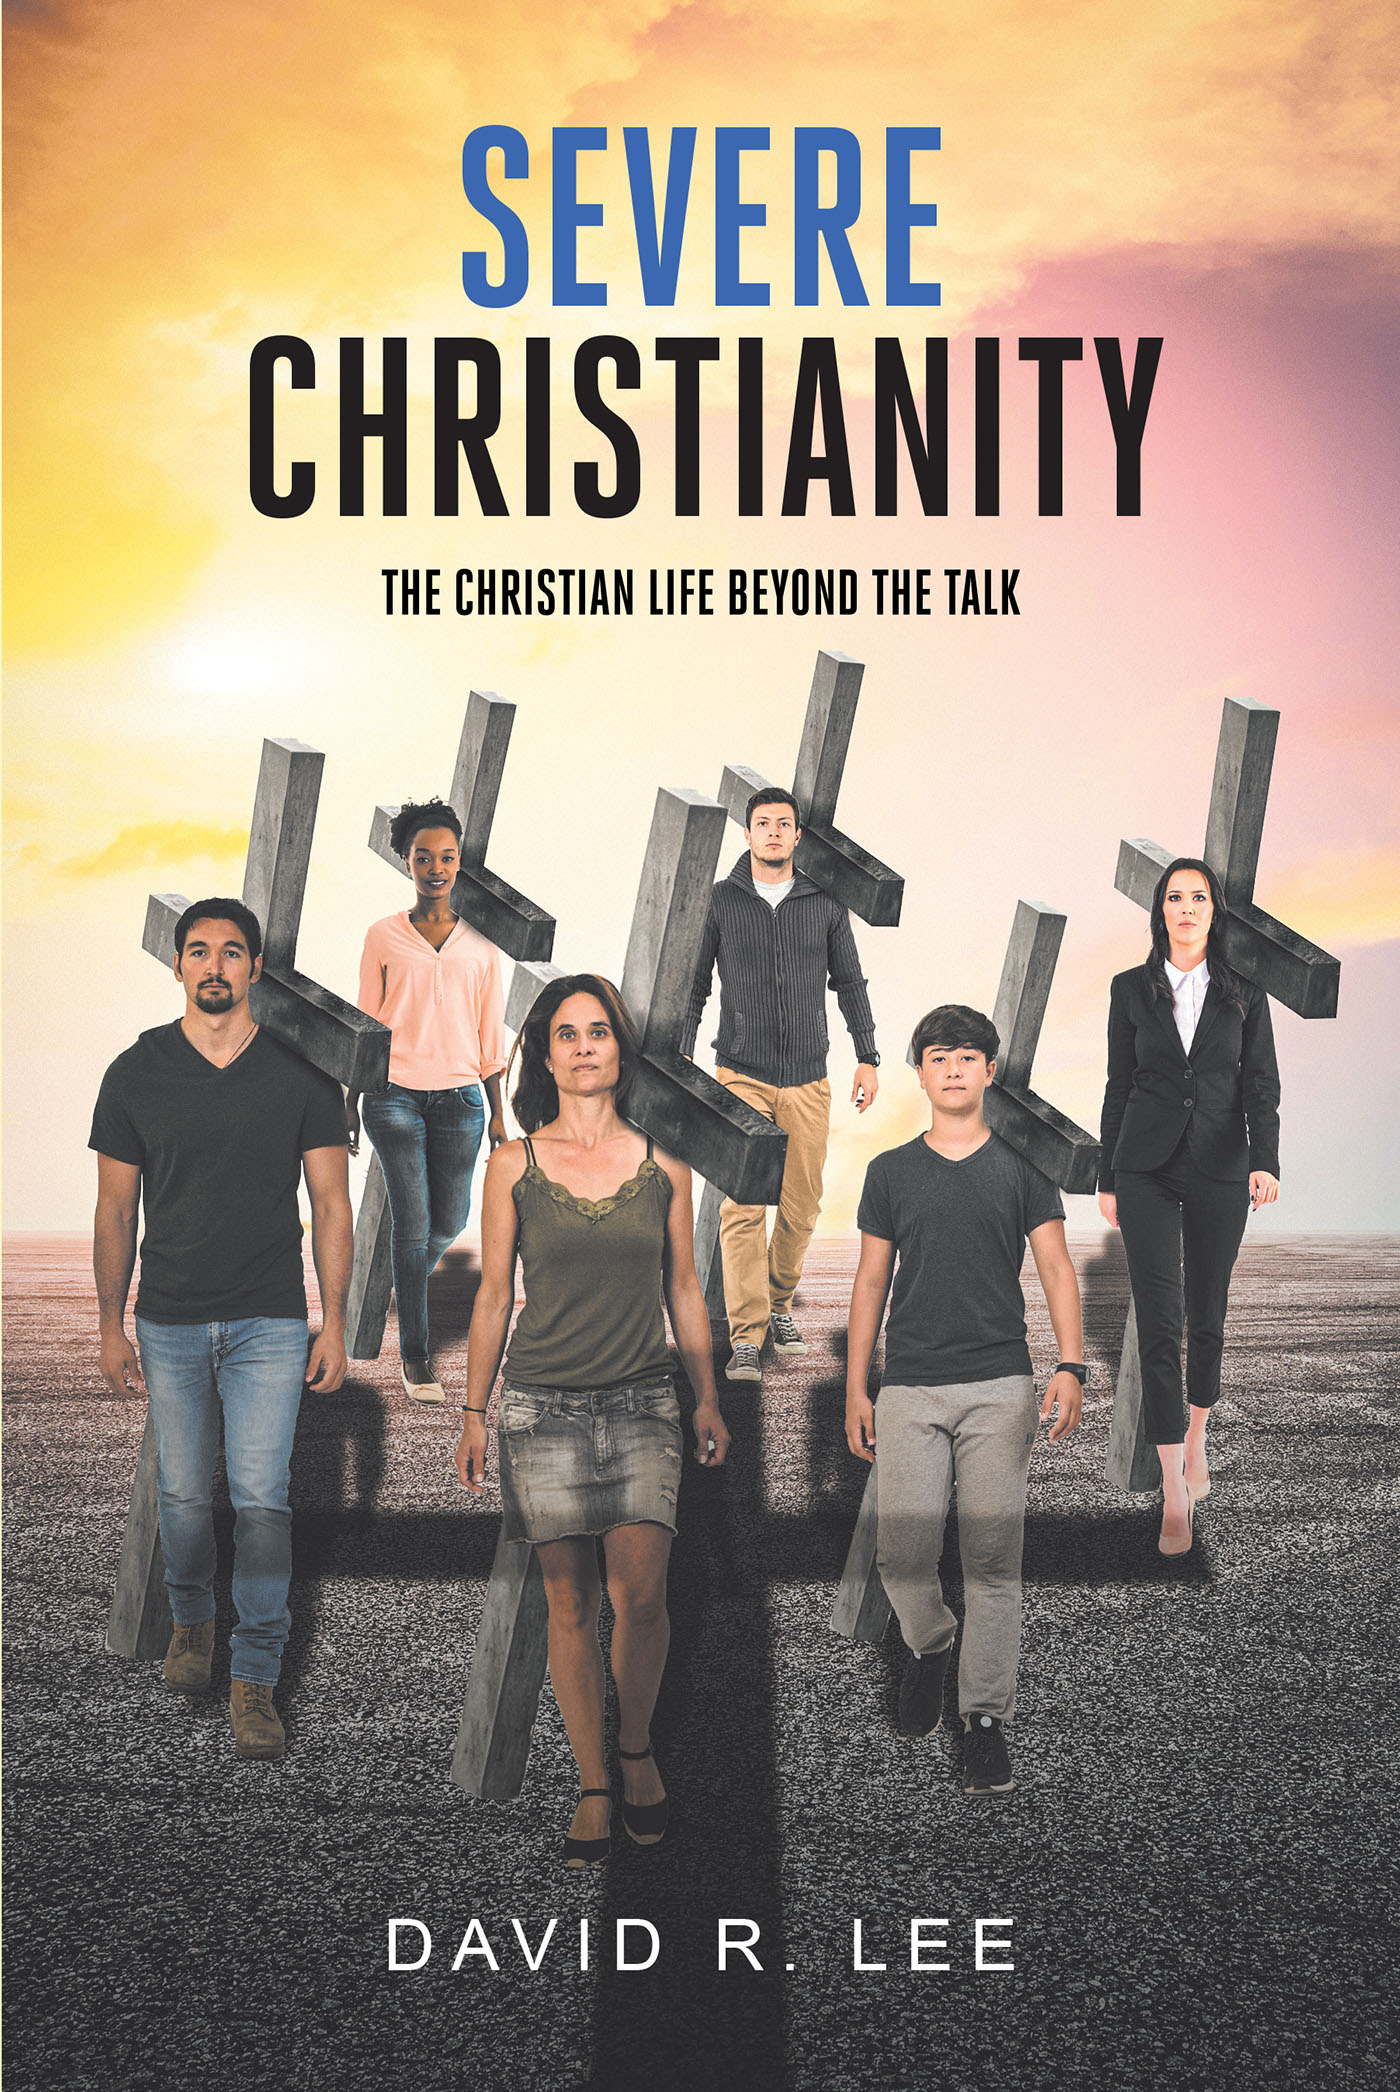 David R. Lee’s newly released “Severe Christianity: The Christian Life beyond the Talk” is an encouraging resource for those seeking a deepened faith.